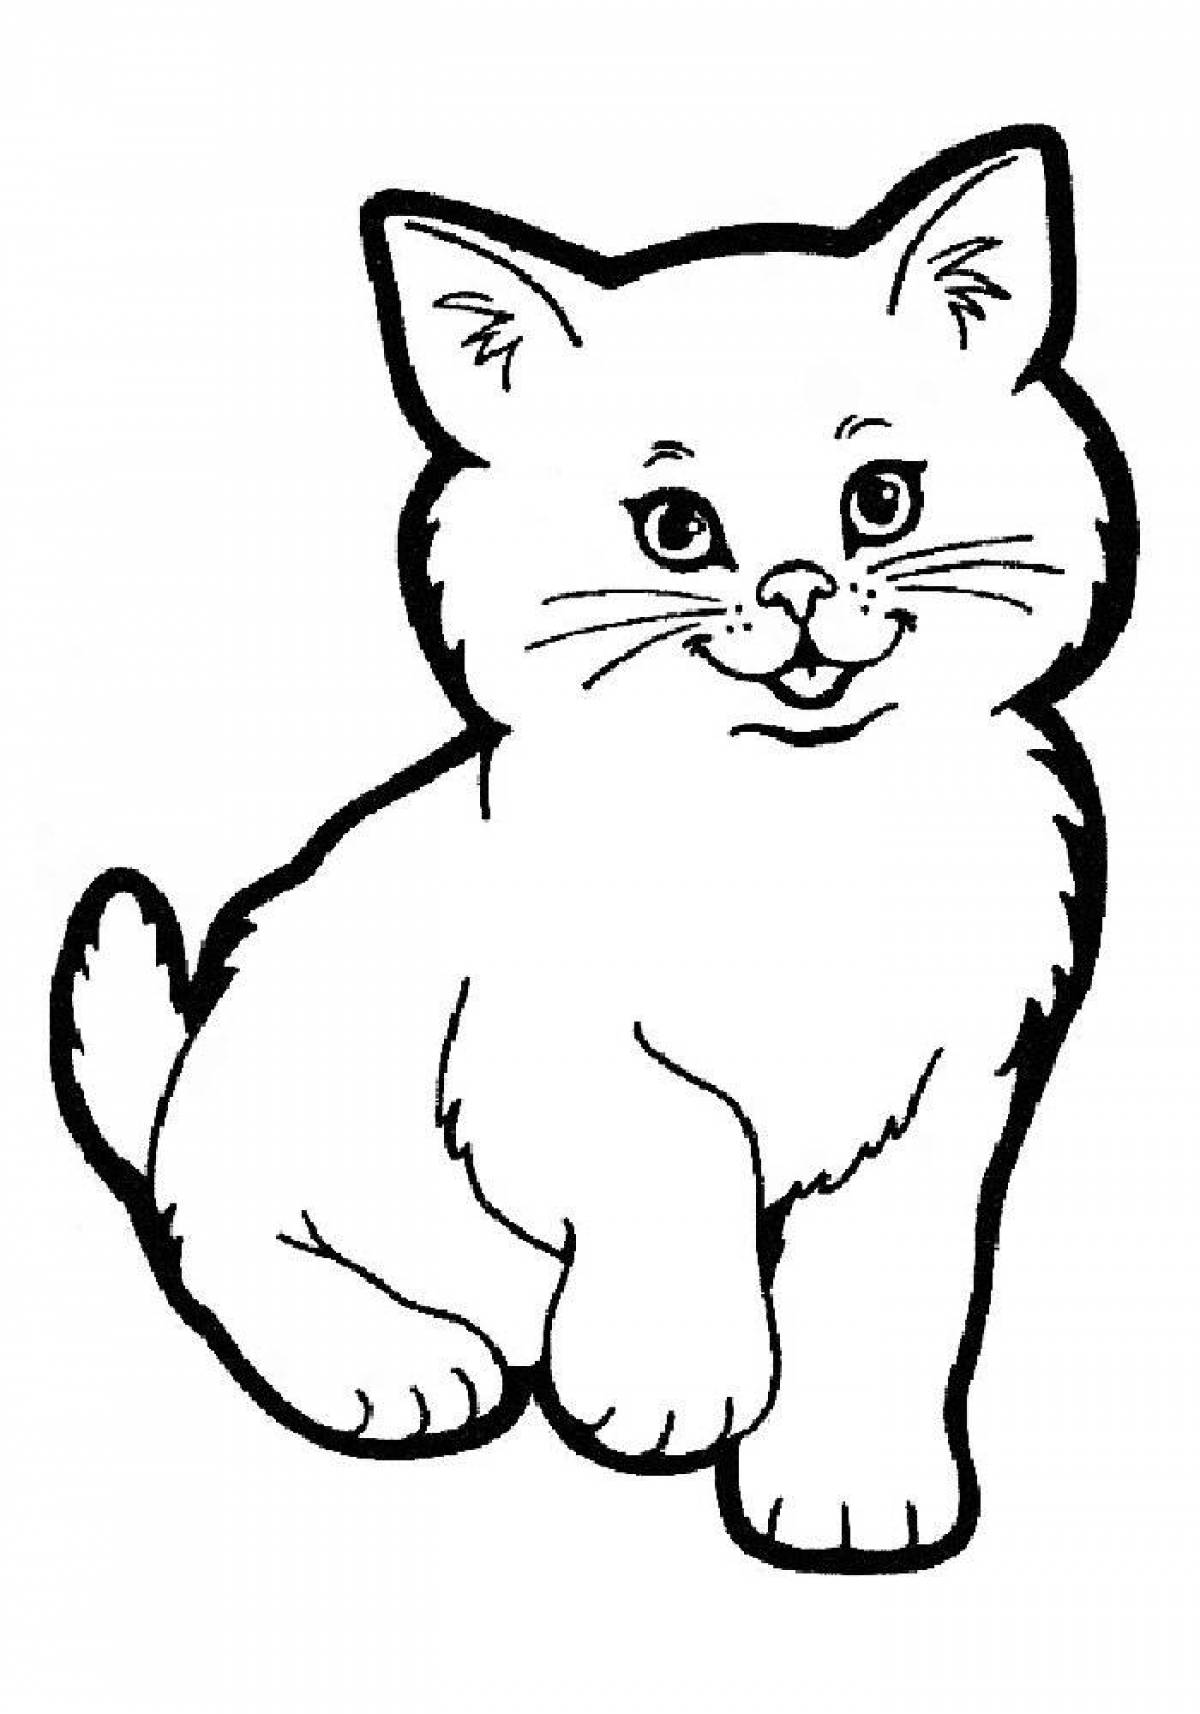 Playful kitten coloring page for kids